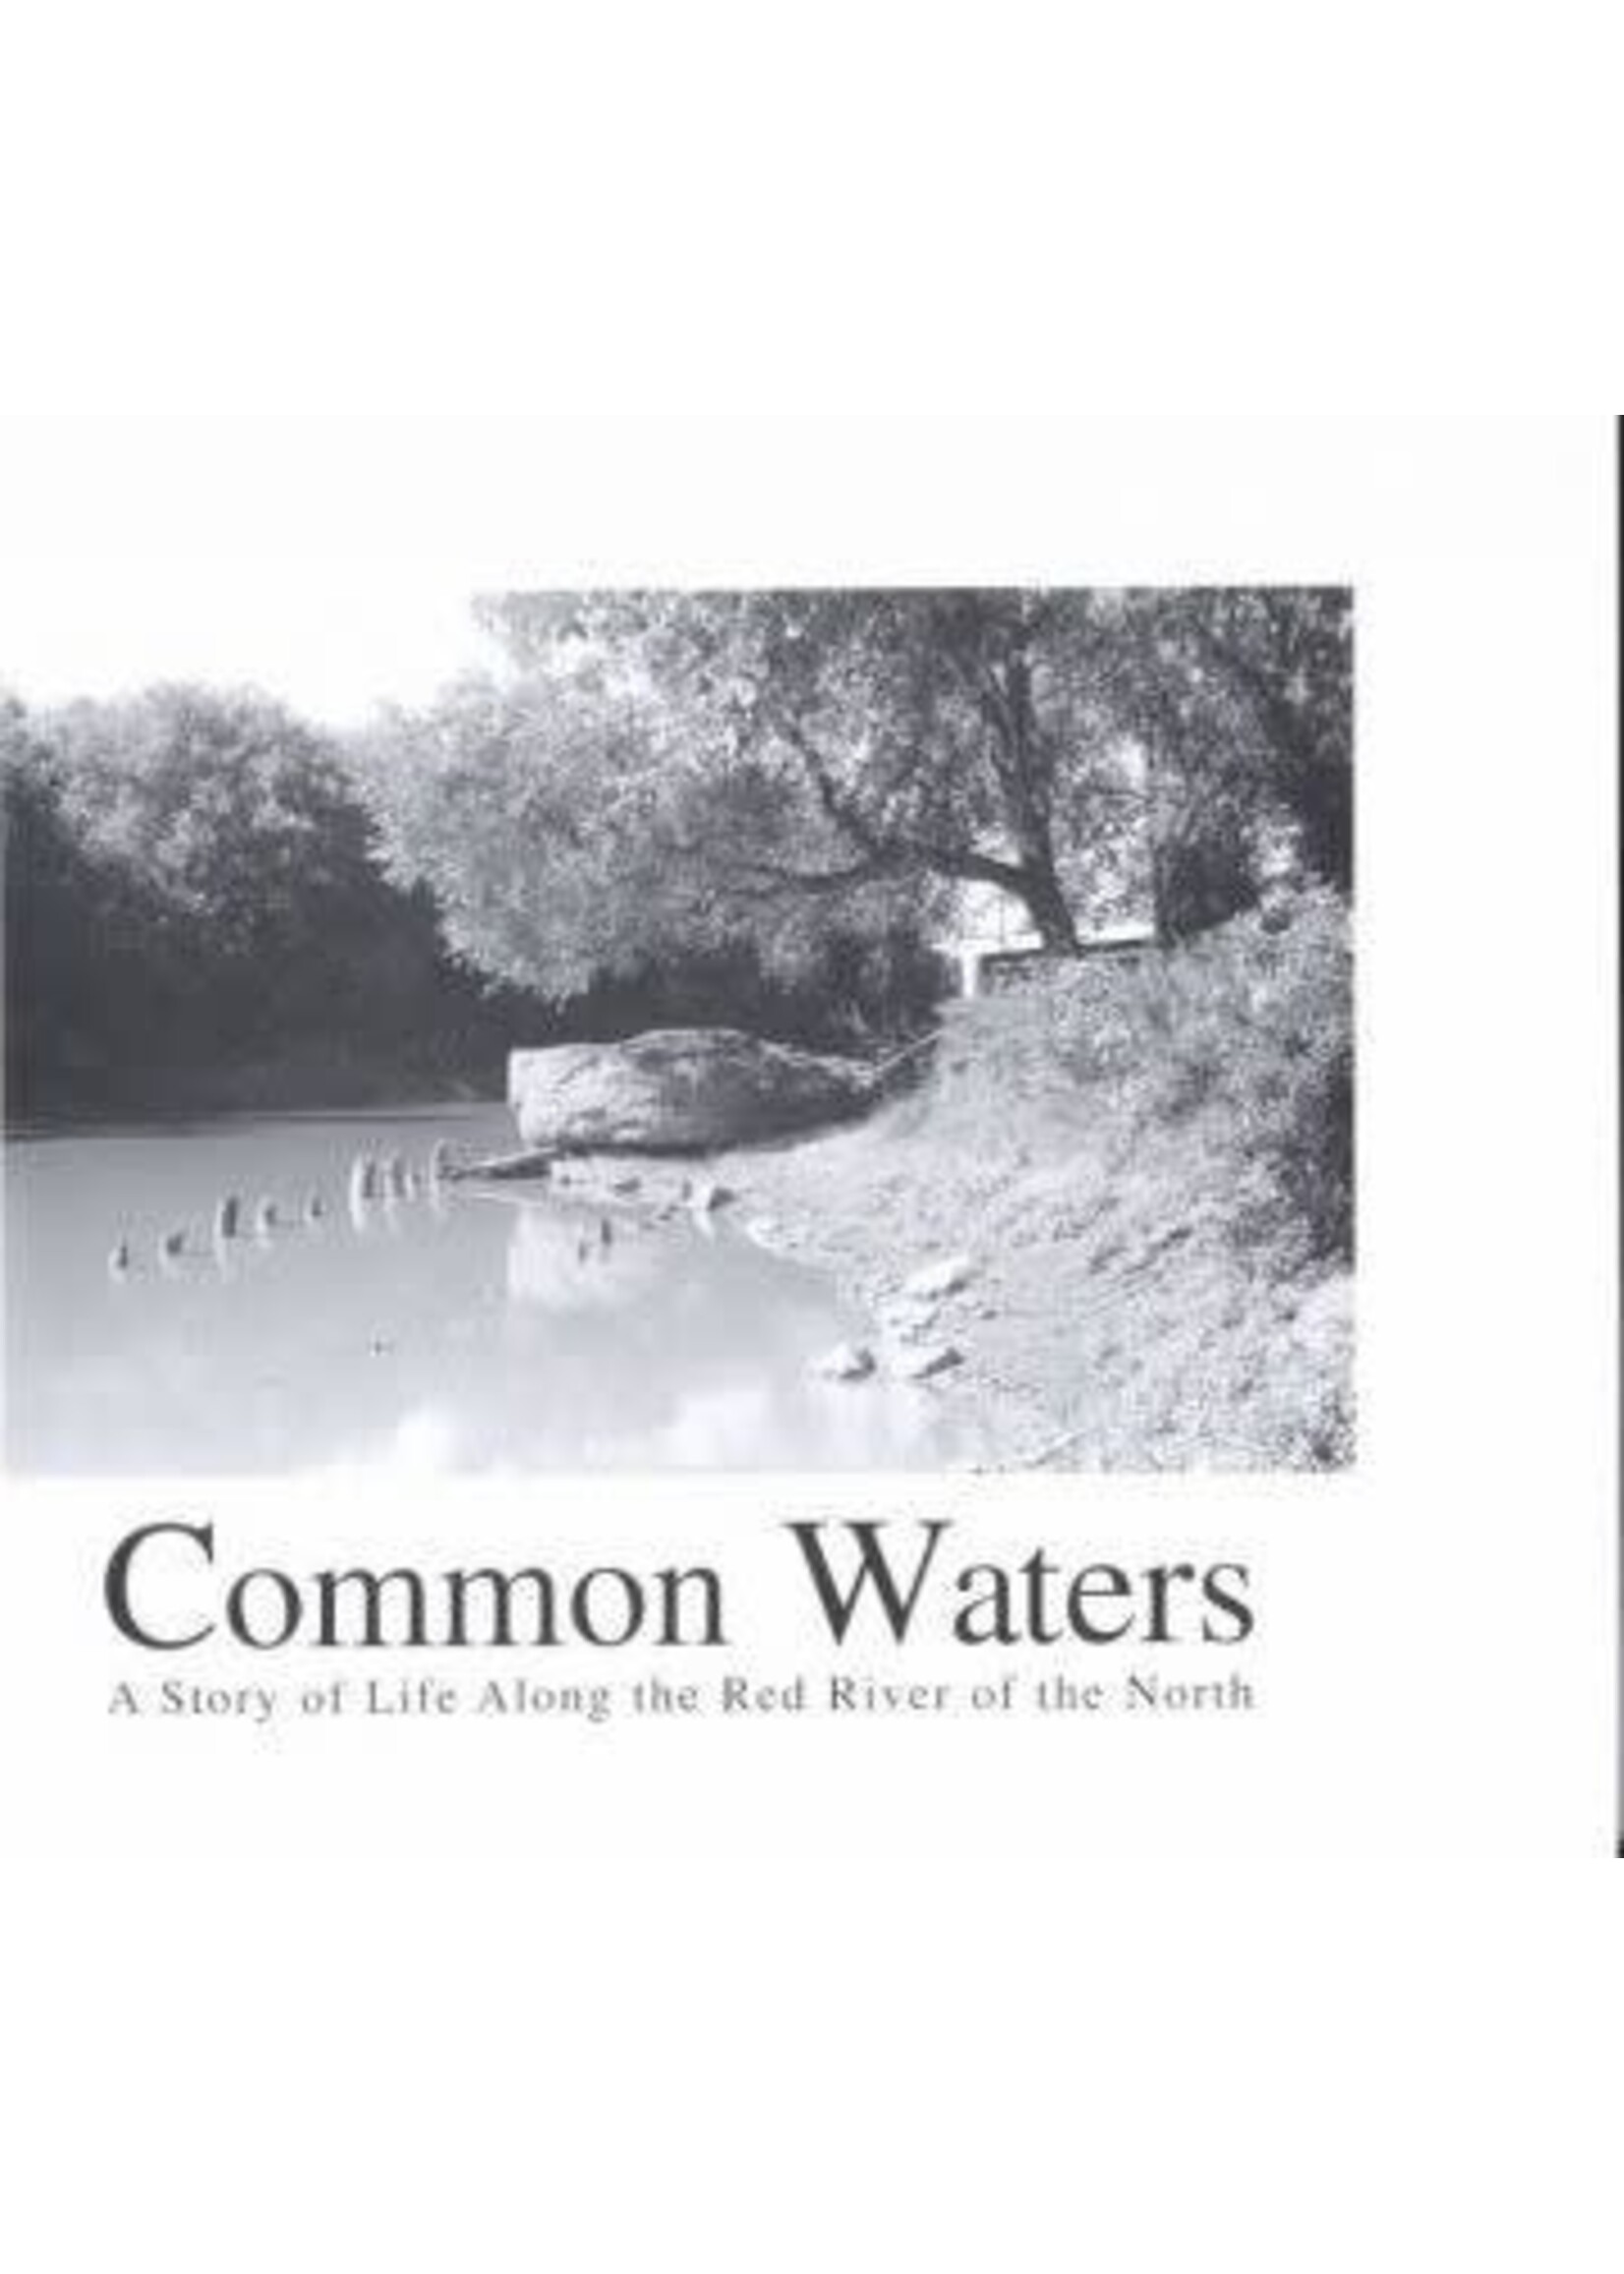 Common Waters: A Story of Life Along the Red River of the North